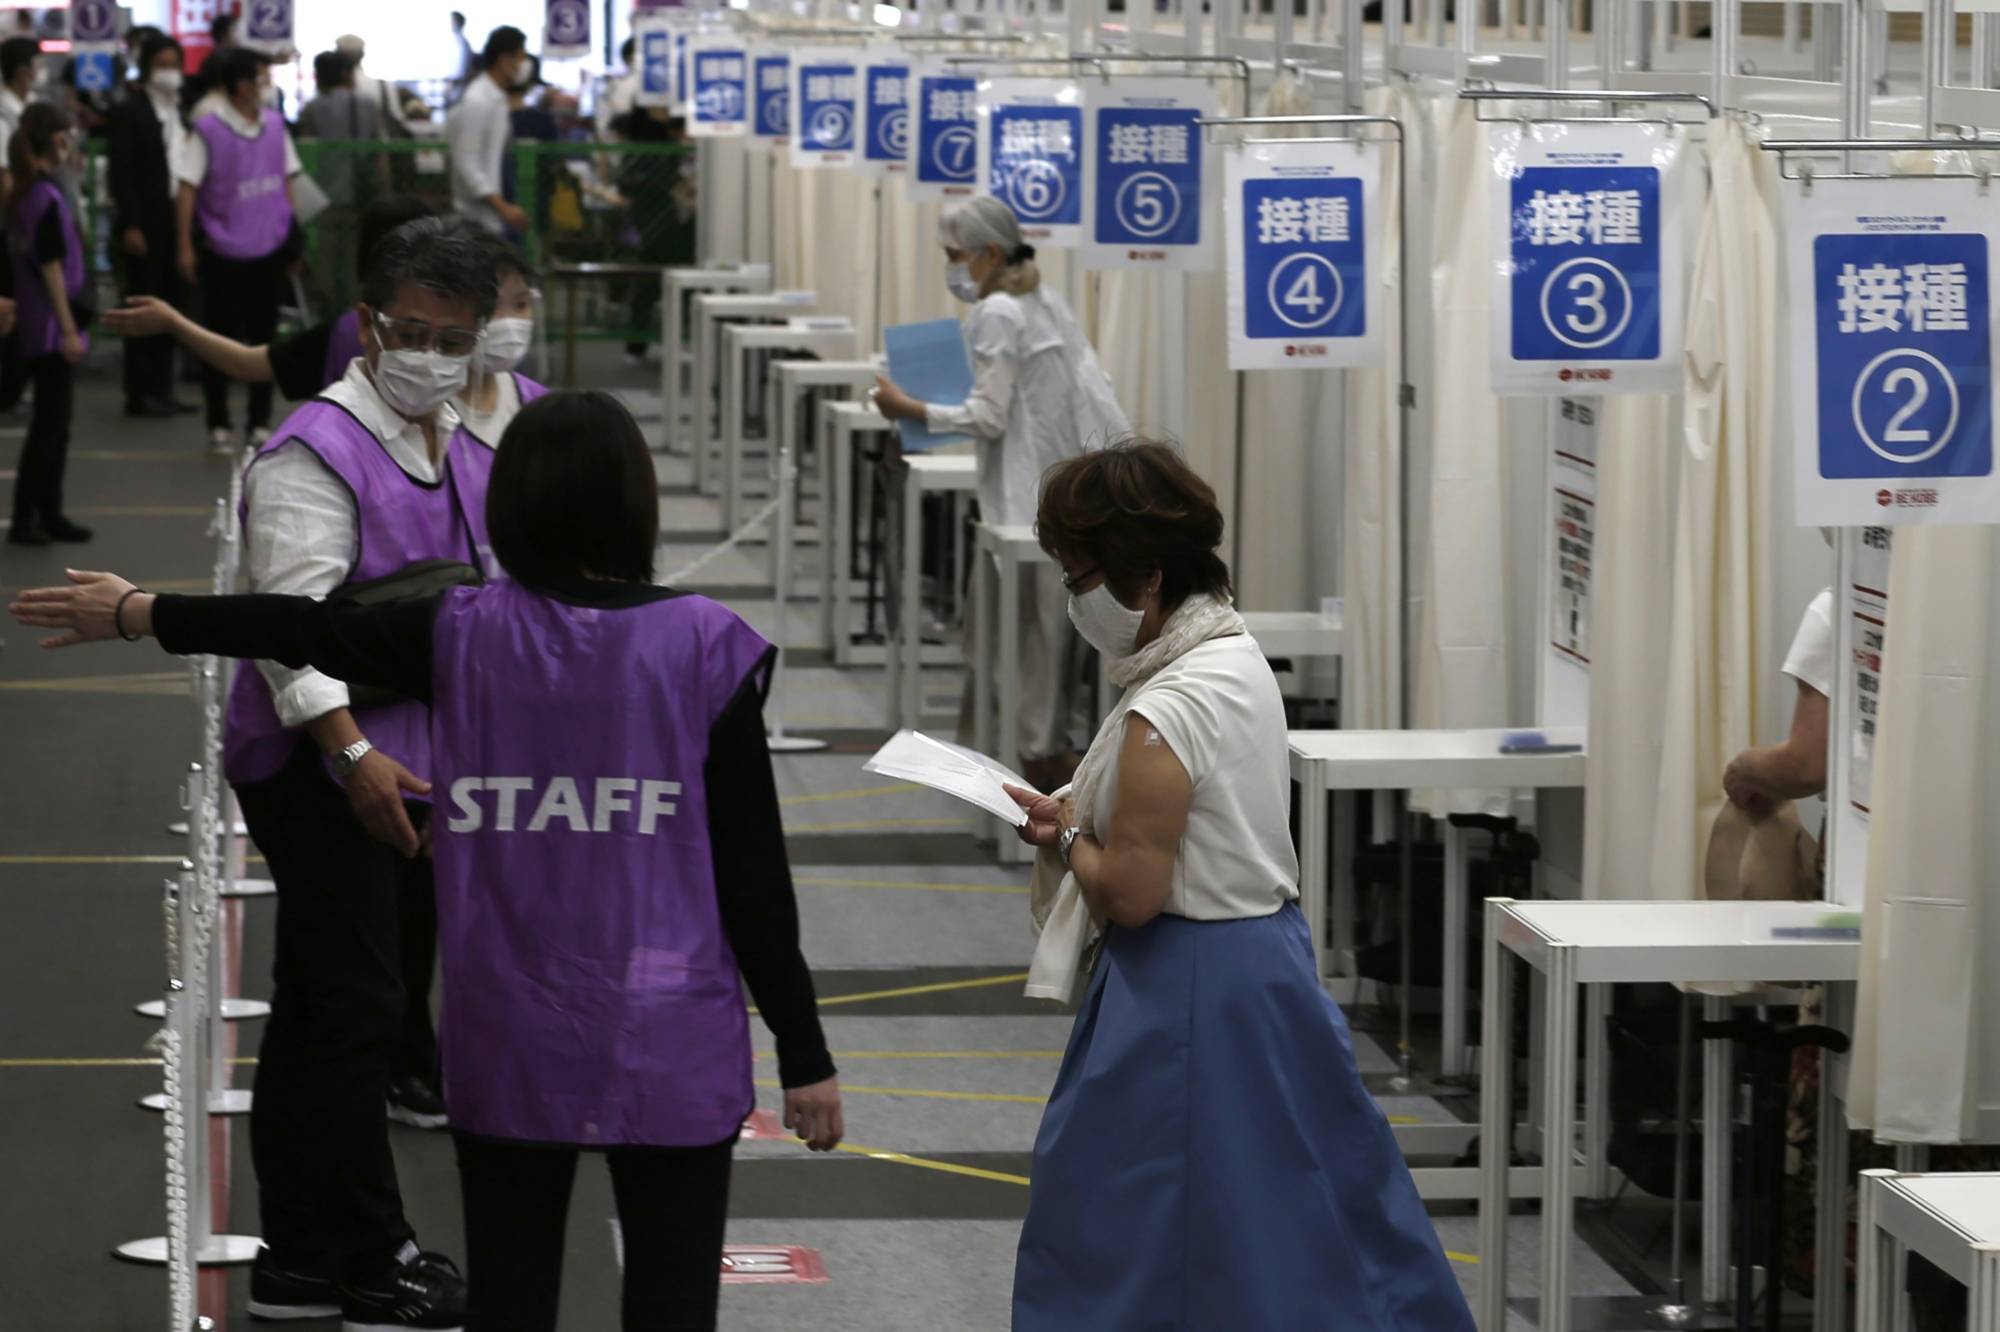 A woman walks away from vaccination booths after receiving a dose of the Pfizer-BioNTech COVID-19 vaccine at a mass inoculation site at Noevir Stadium Kobe in June. | BLOOMBERG